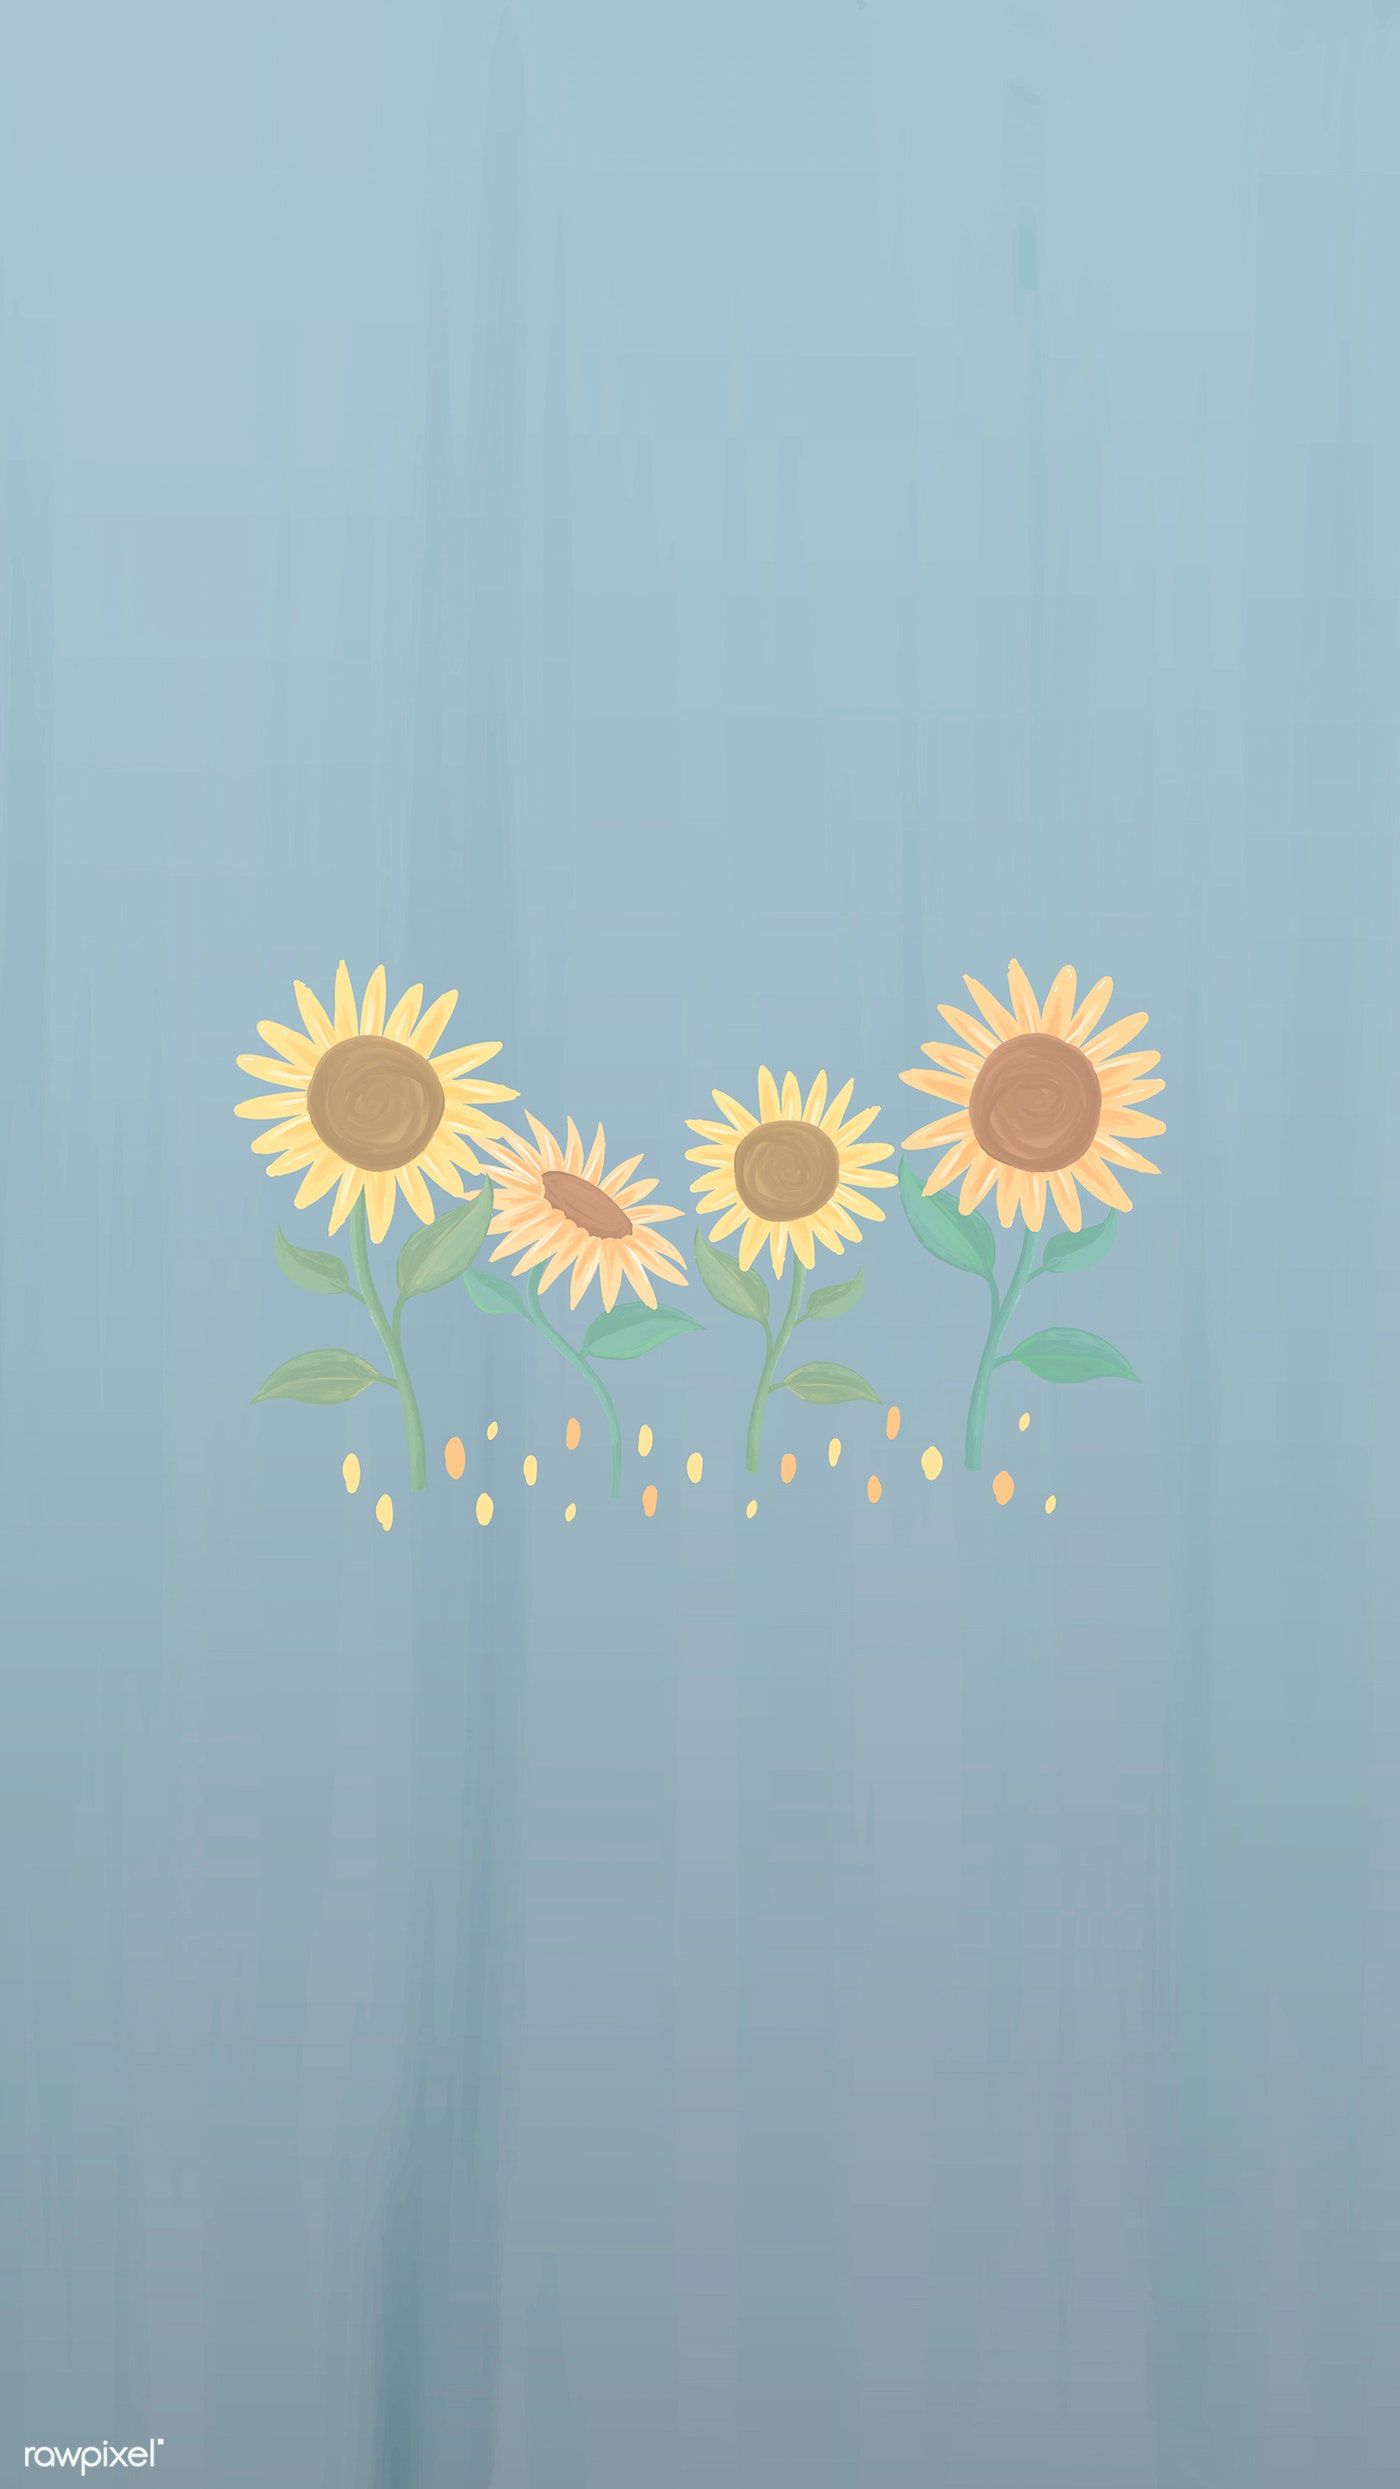 Download premium vector of Hand drawn sunflower mobile phone wallpaper vector by Tang about wallpaper sunflower iphone wallpaper sunflower wallpaper and aesthetic sunflower 1229950